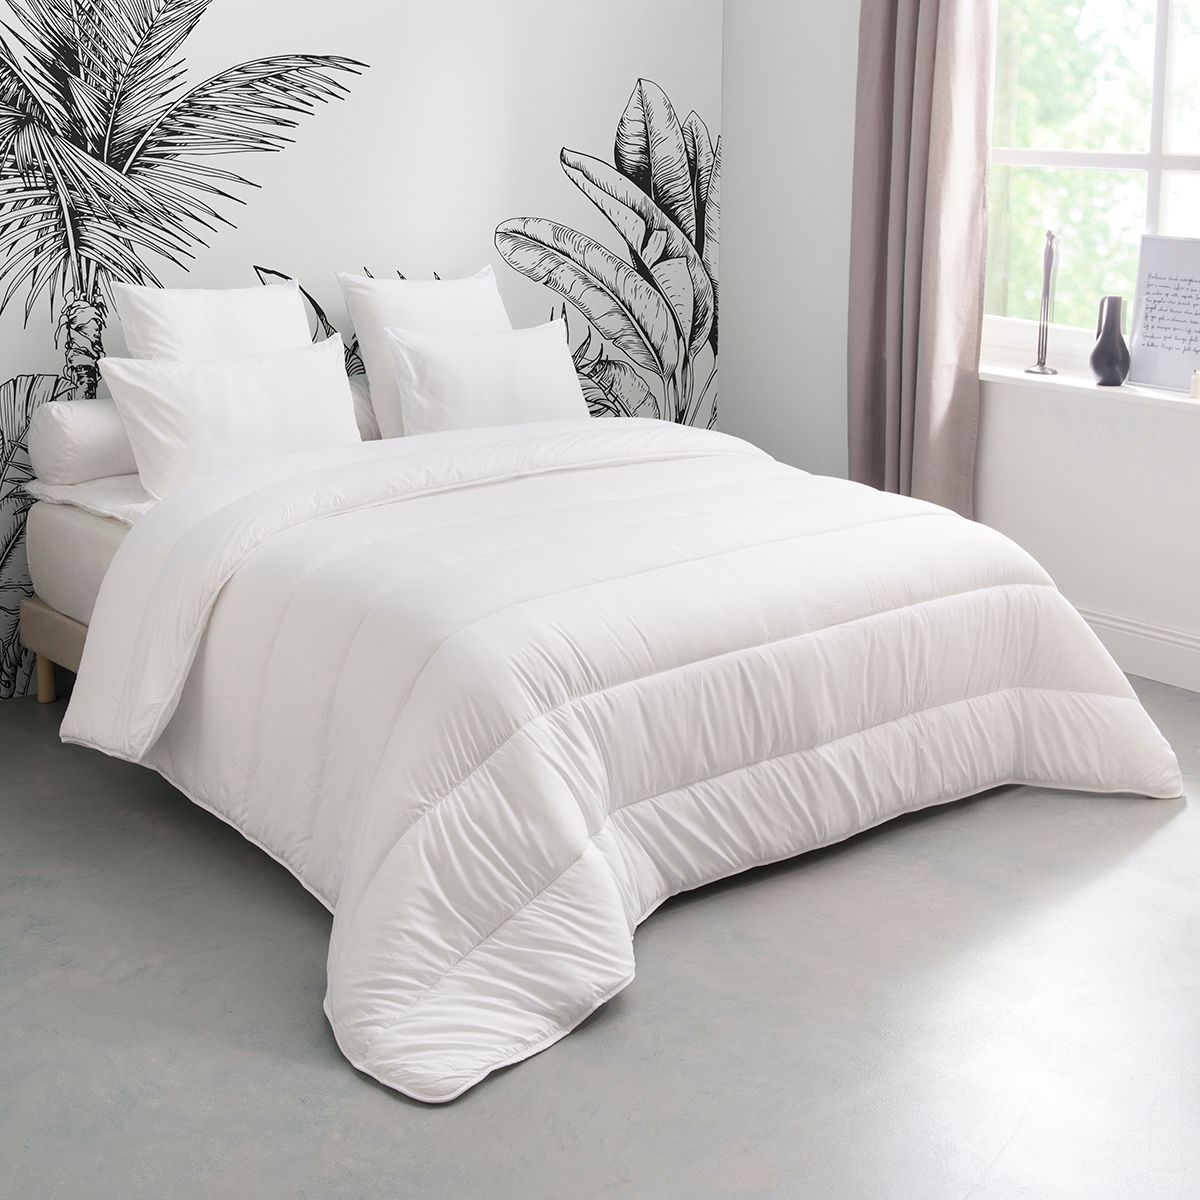 Couette ultra et extra gonflante - CASTEX